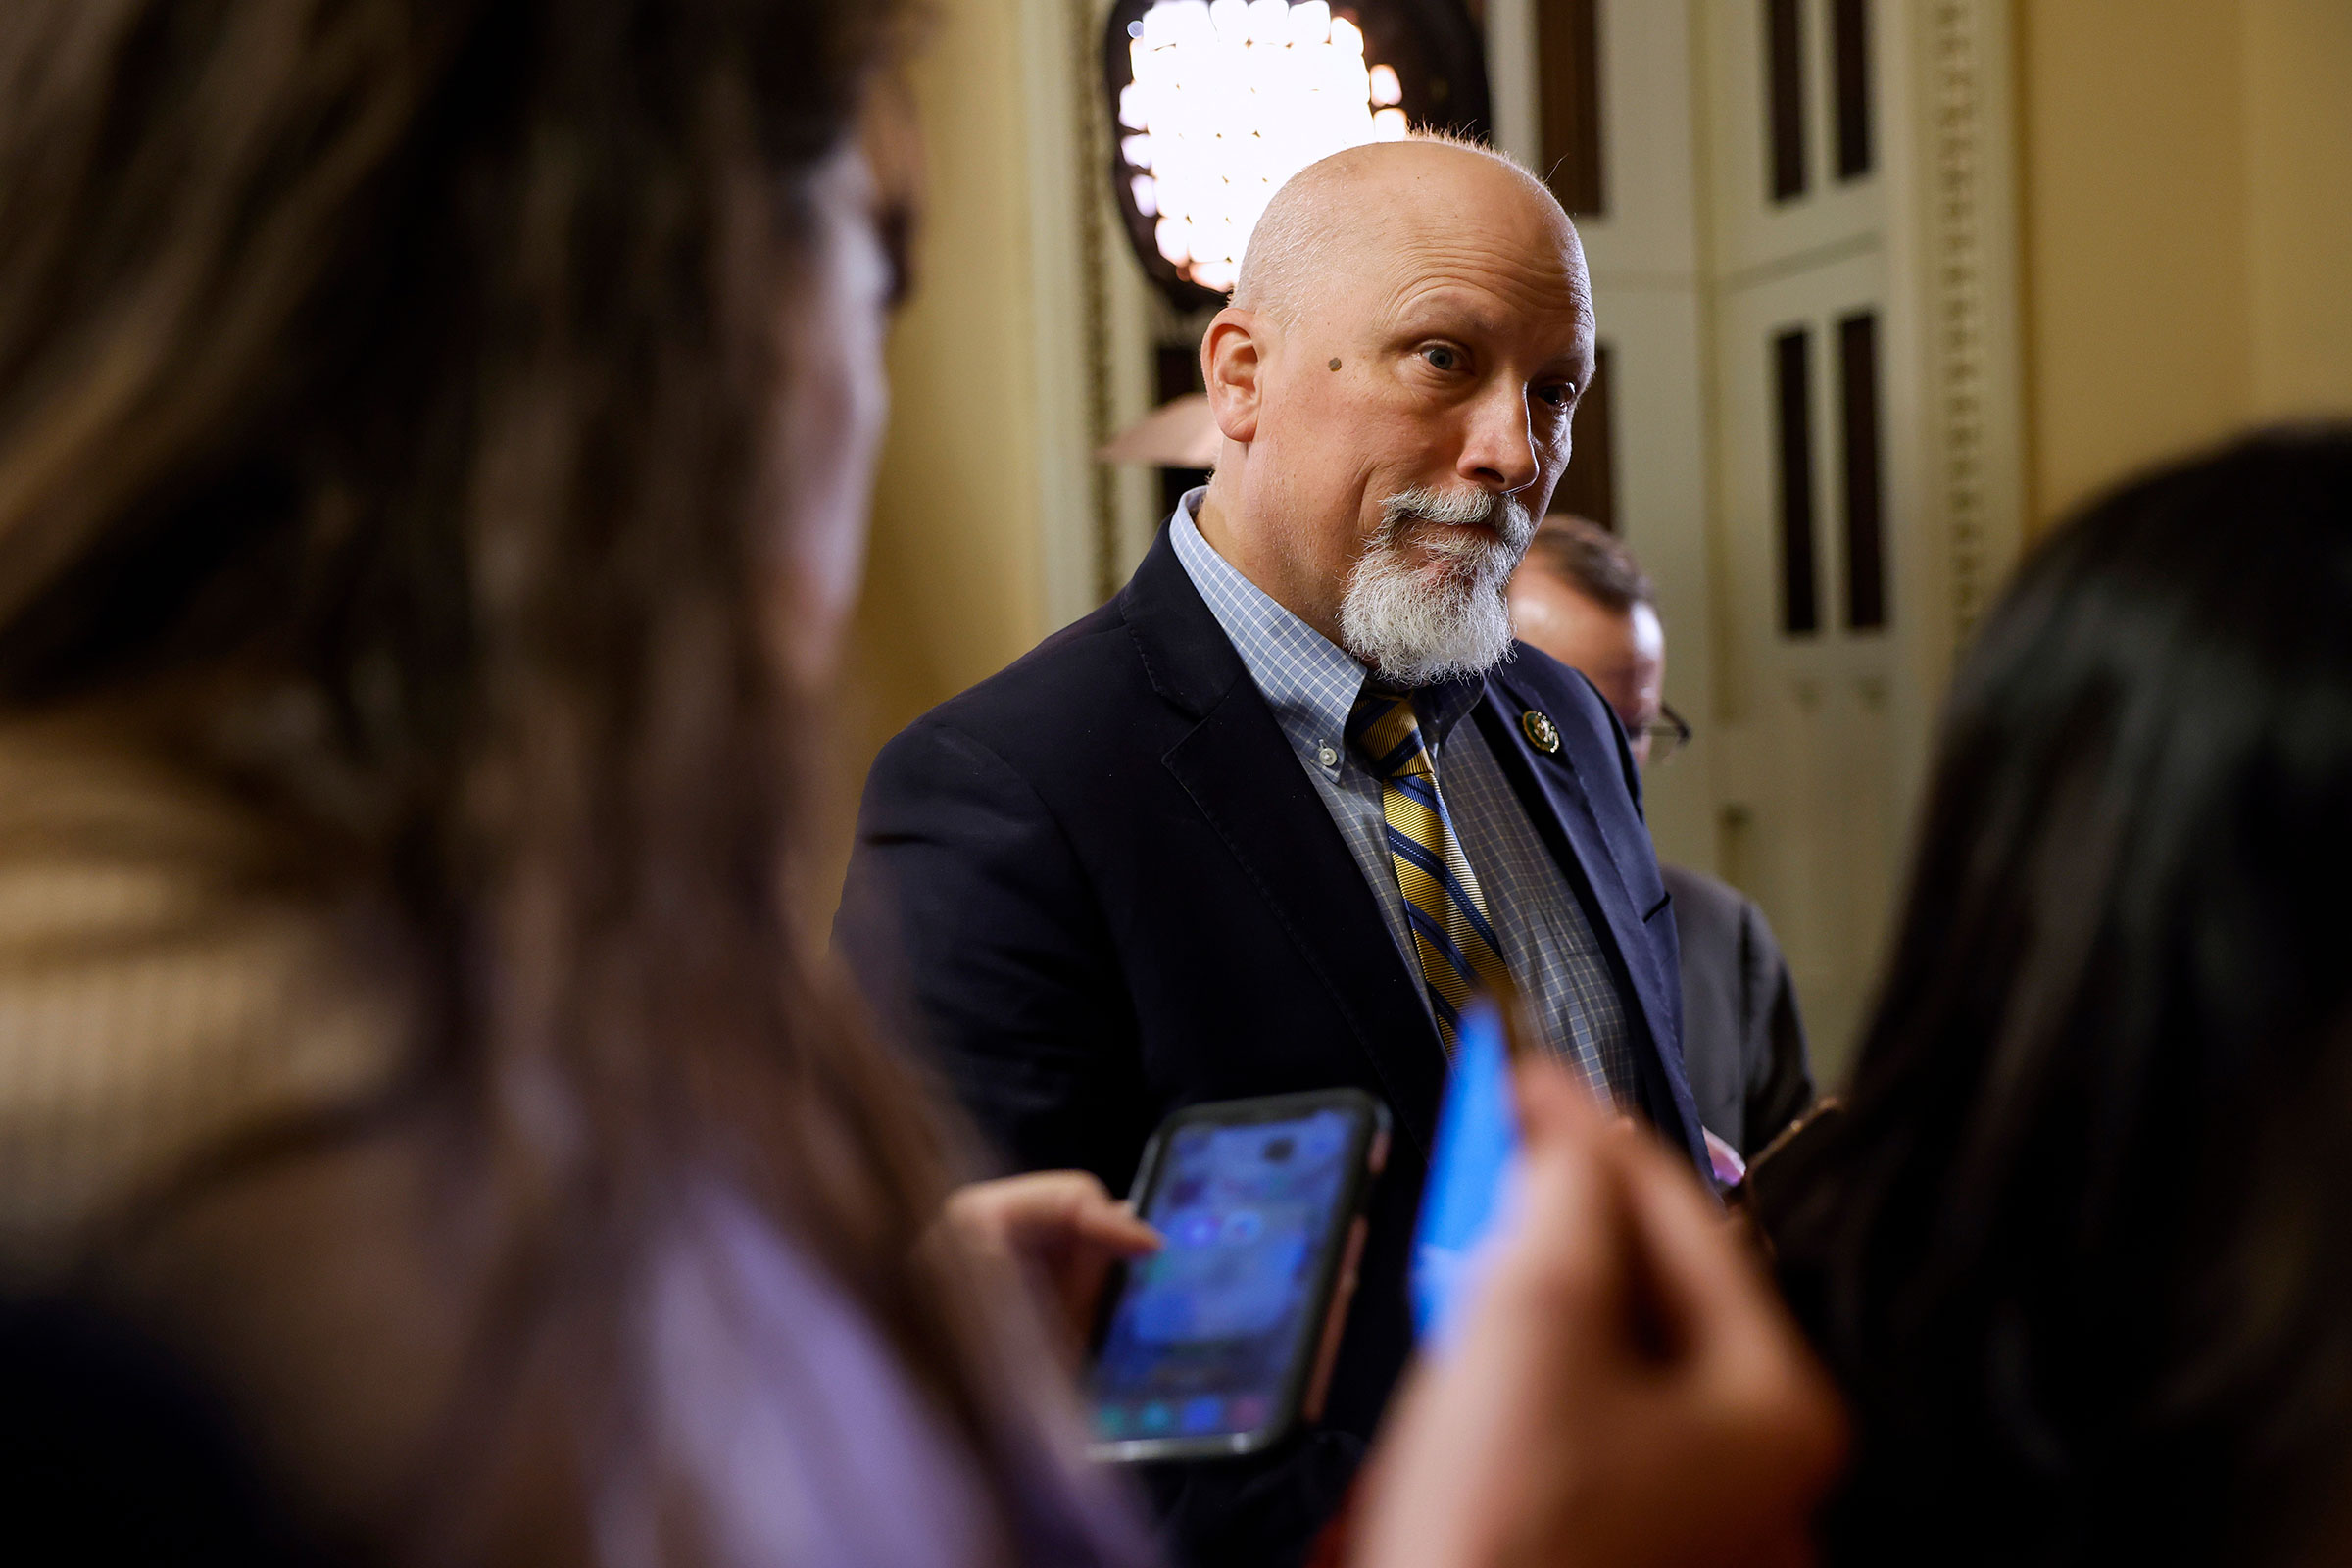 Rep. Chip Roy speaks to reporters about his opposition to House Speaker Mike Johnson's proposed government funding legislation inside the Capitol building on November 13, in Washington, DC.